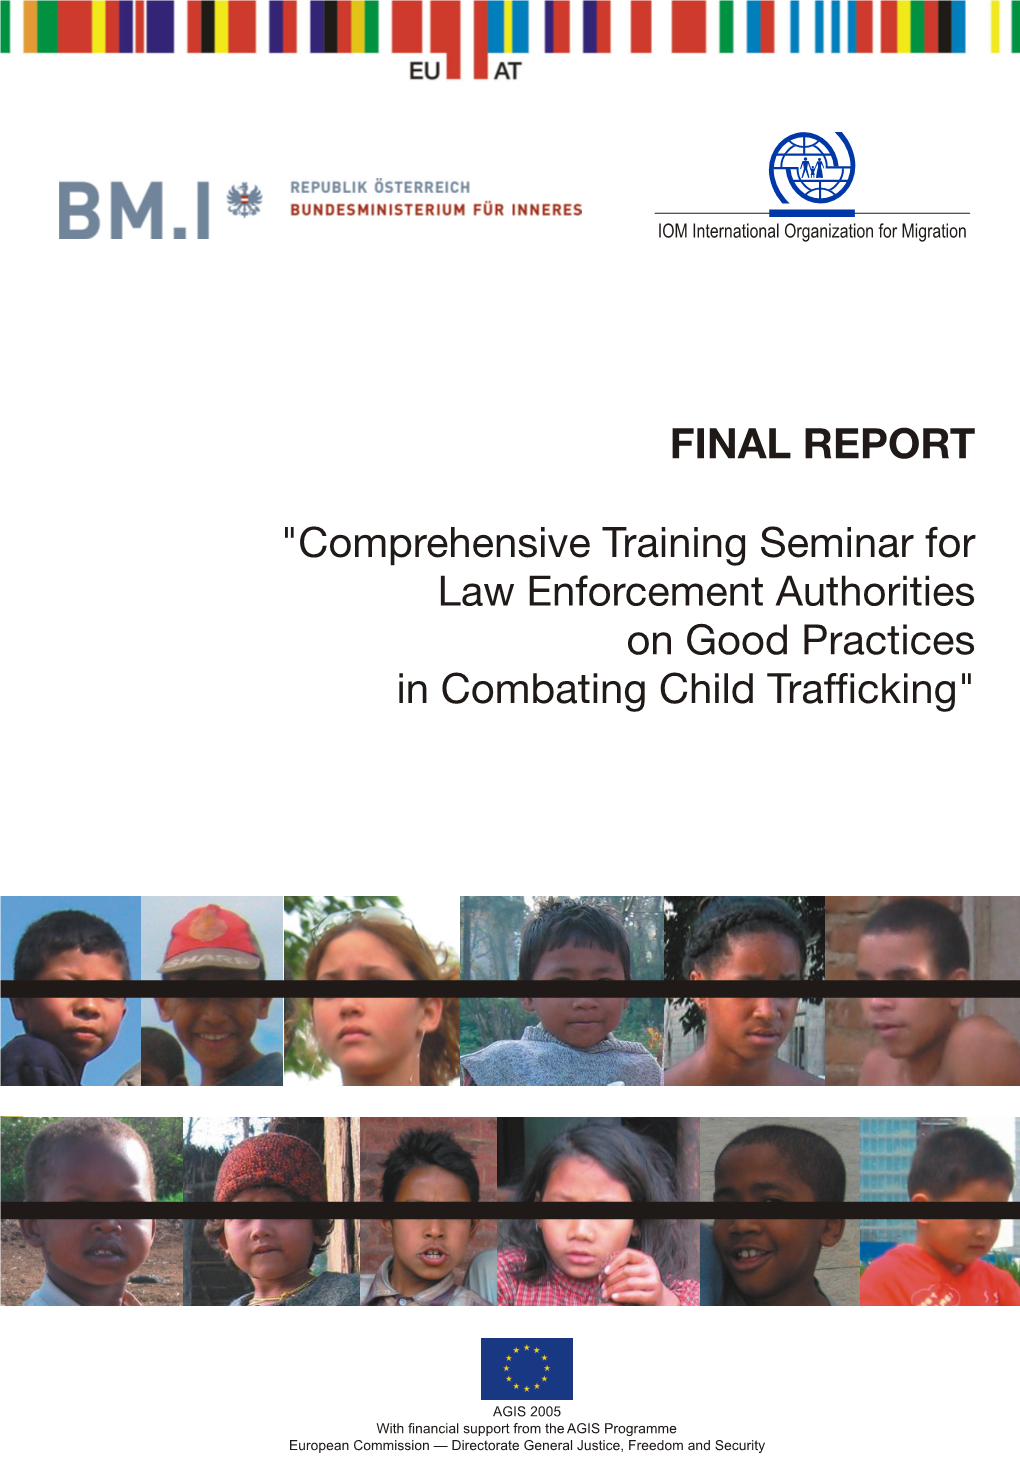 Resource Book for Law Enforcement Officers on Good Practices in Combating Child Trafficking” 2 Via Working Groups of Experts and an International Training Seminar